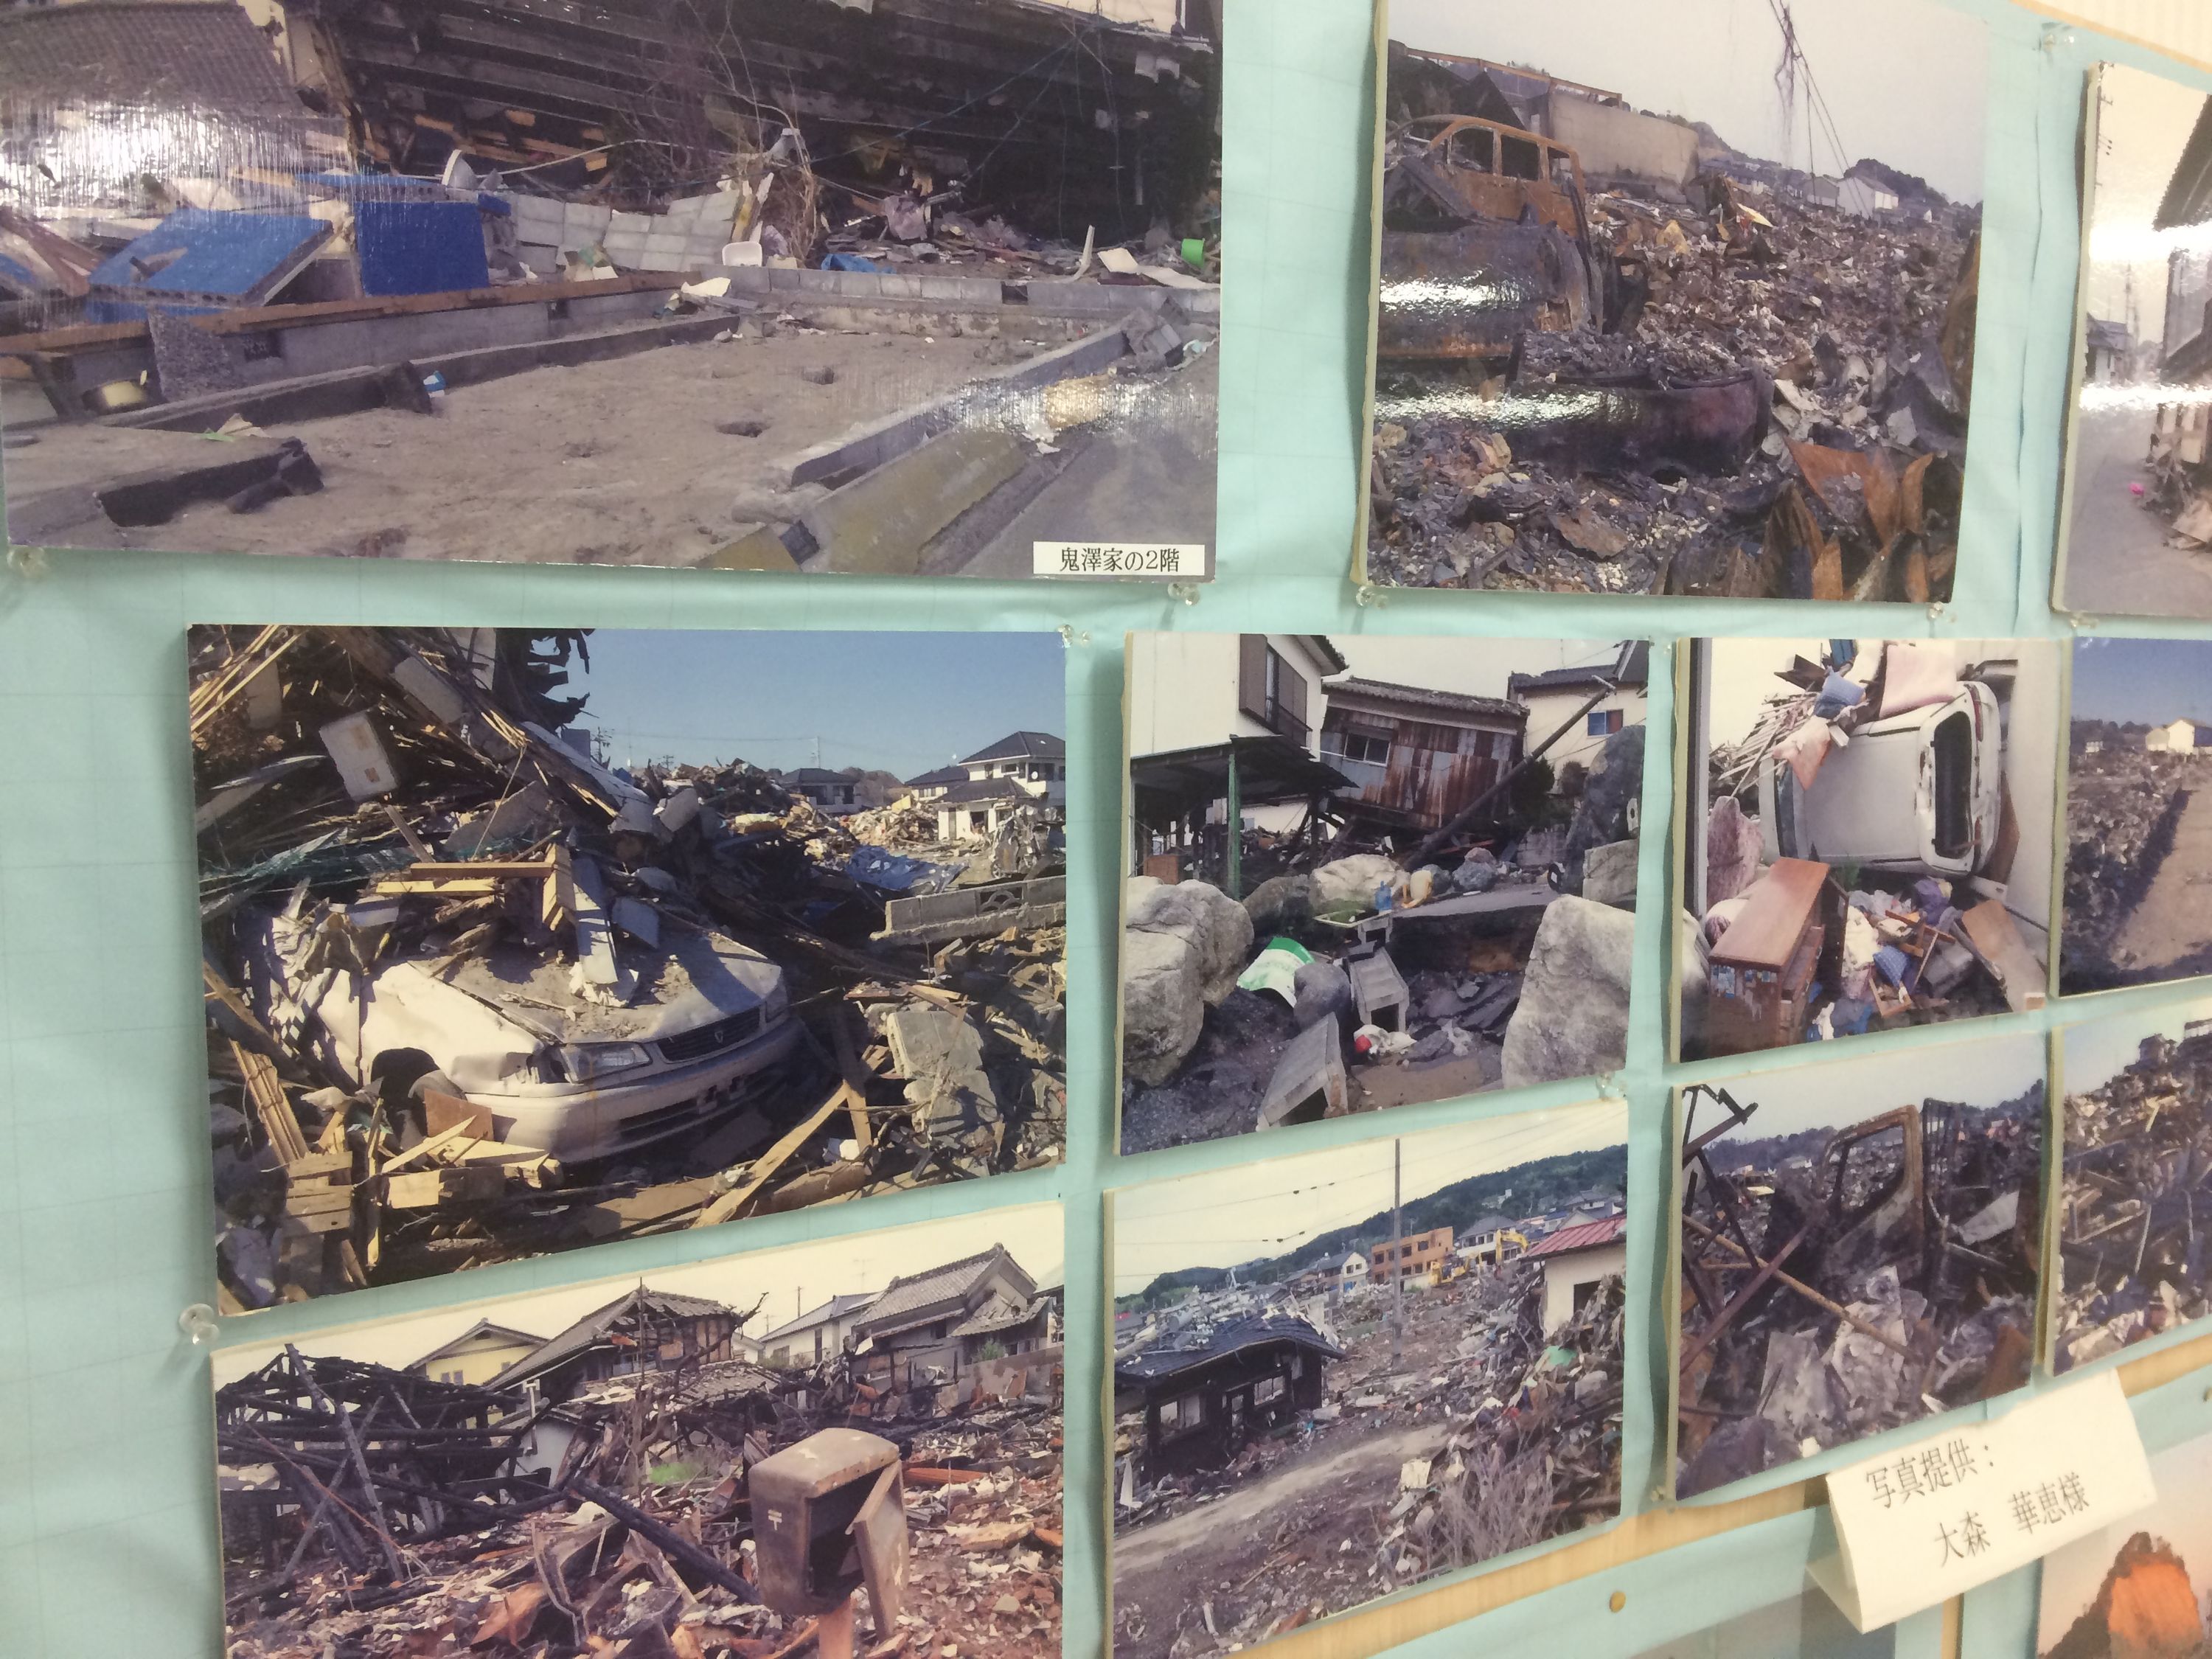 Pictures on a wall show the utter devastation of Hisanohama after the tsunami.